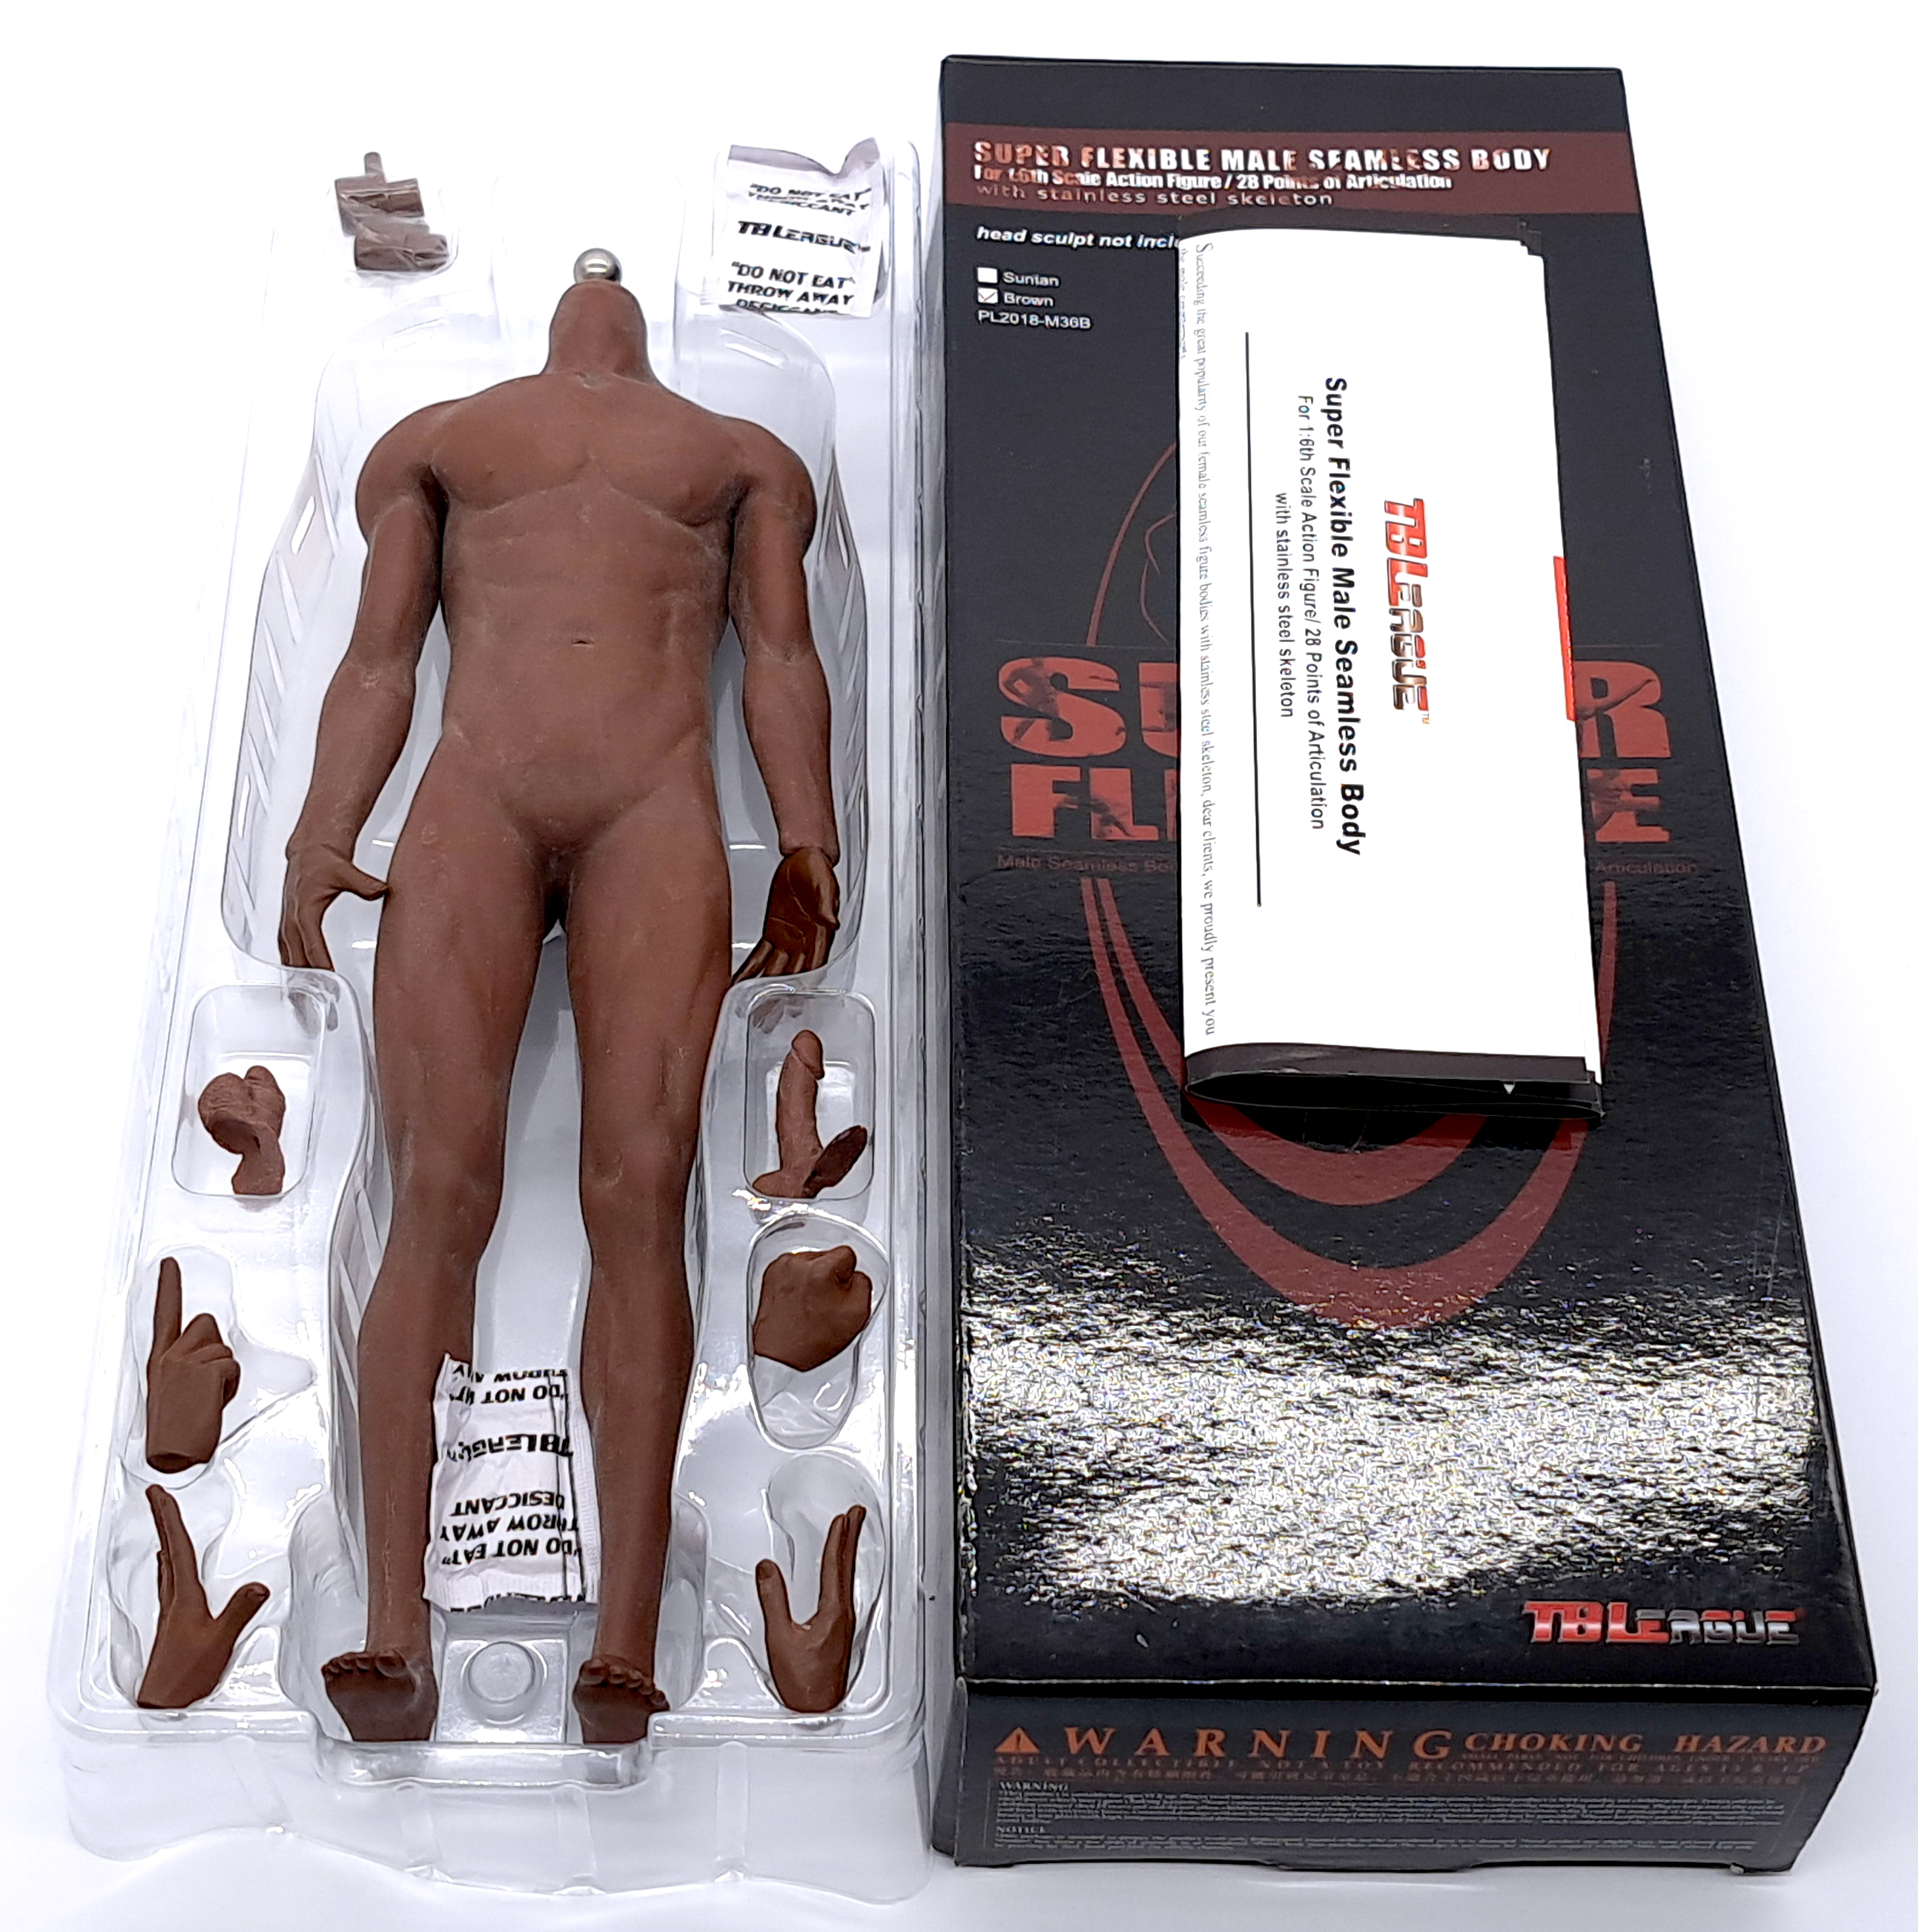 TBLeague Superflexible Male Seamless Body for 1:6 scale action figure - Image 2 of 2